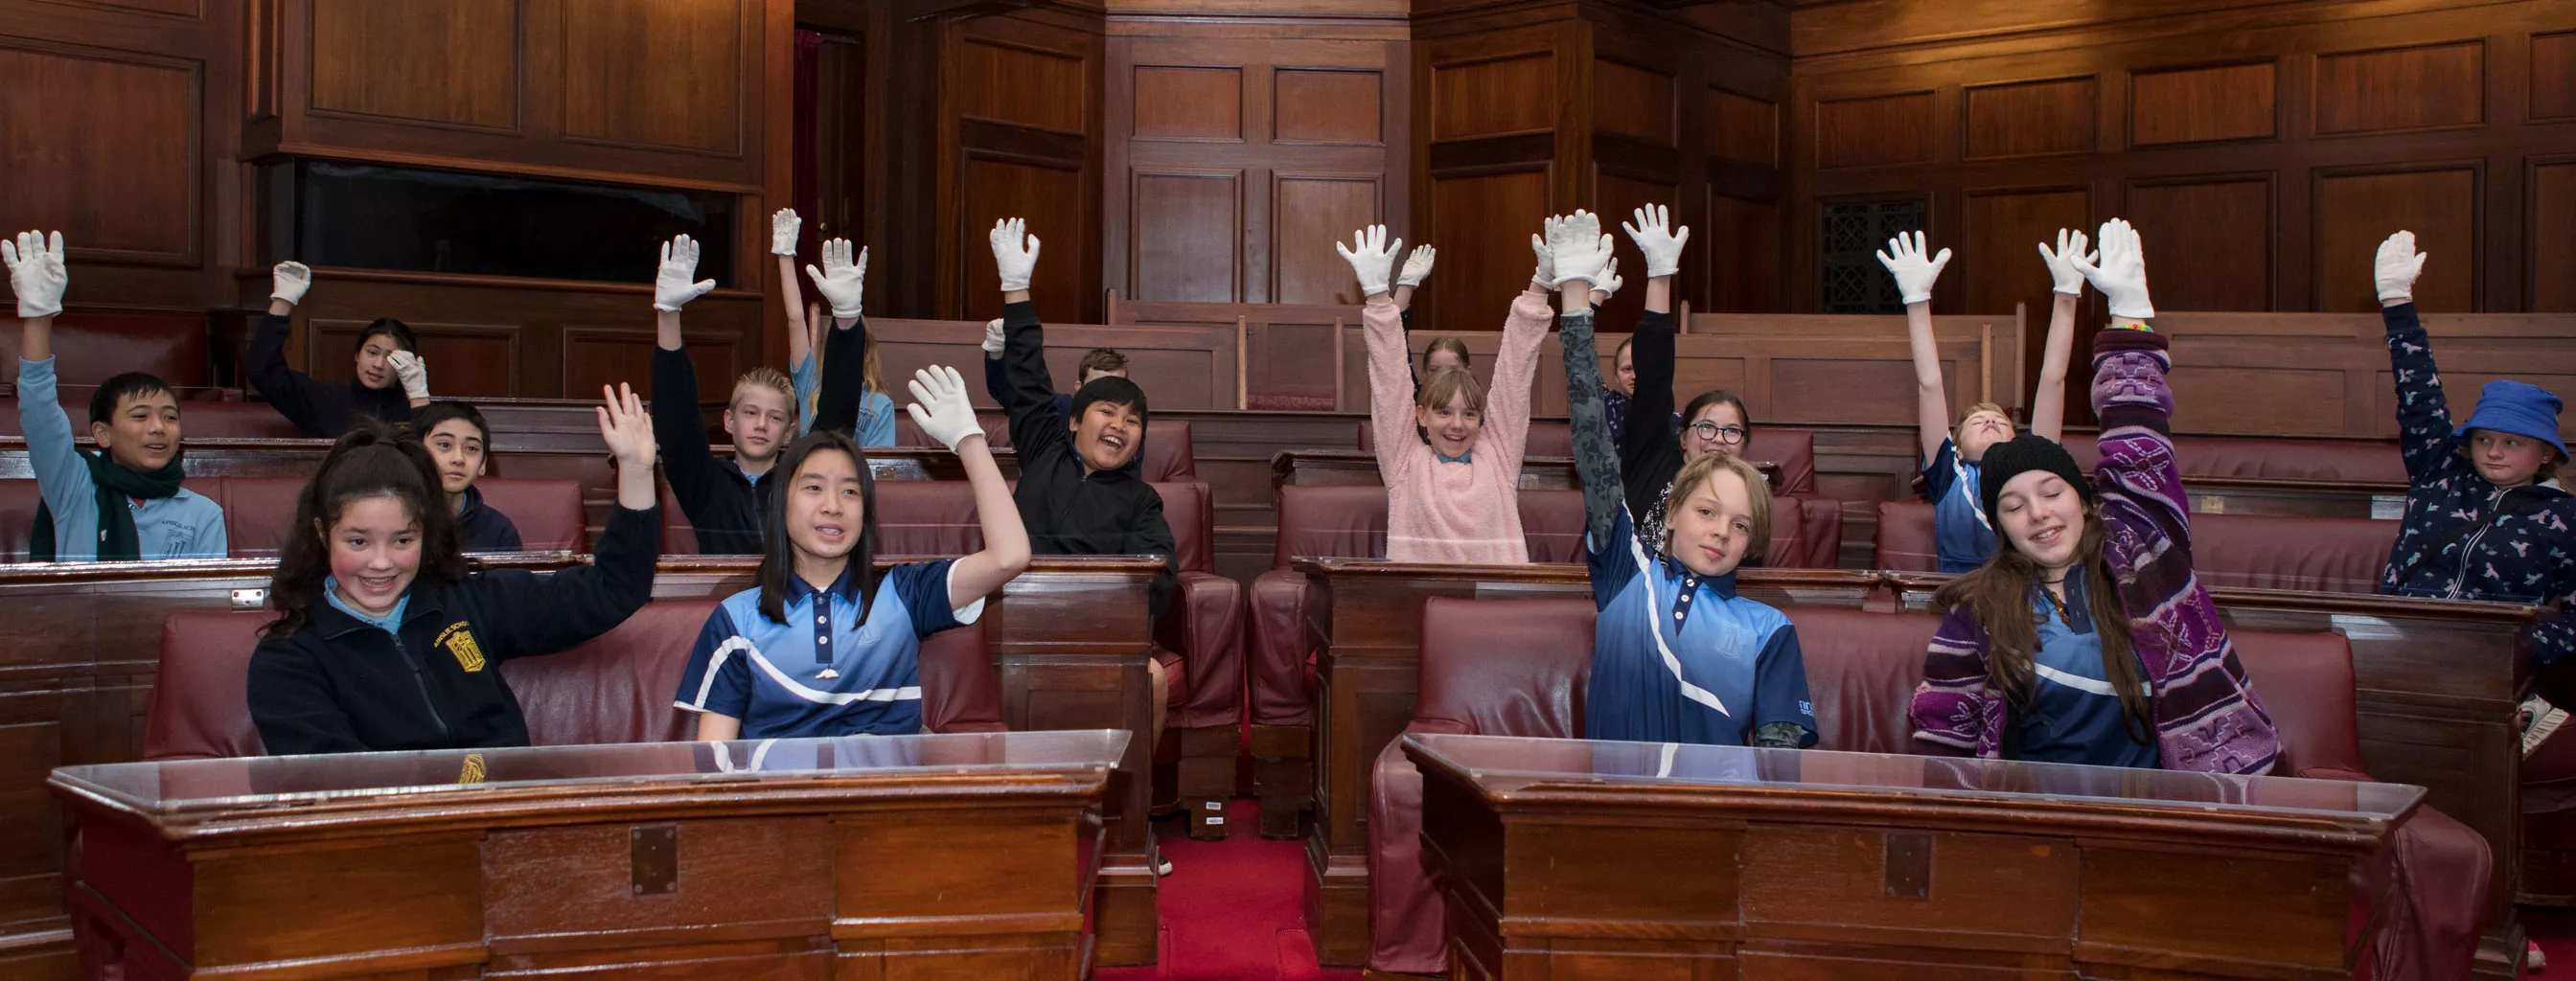 School children raise their hands while sitting in the Senate Chamber which has red carpet and wood panelled benches in a U-shape. 